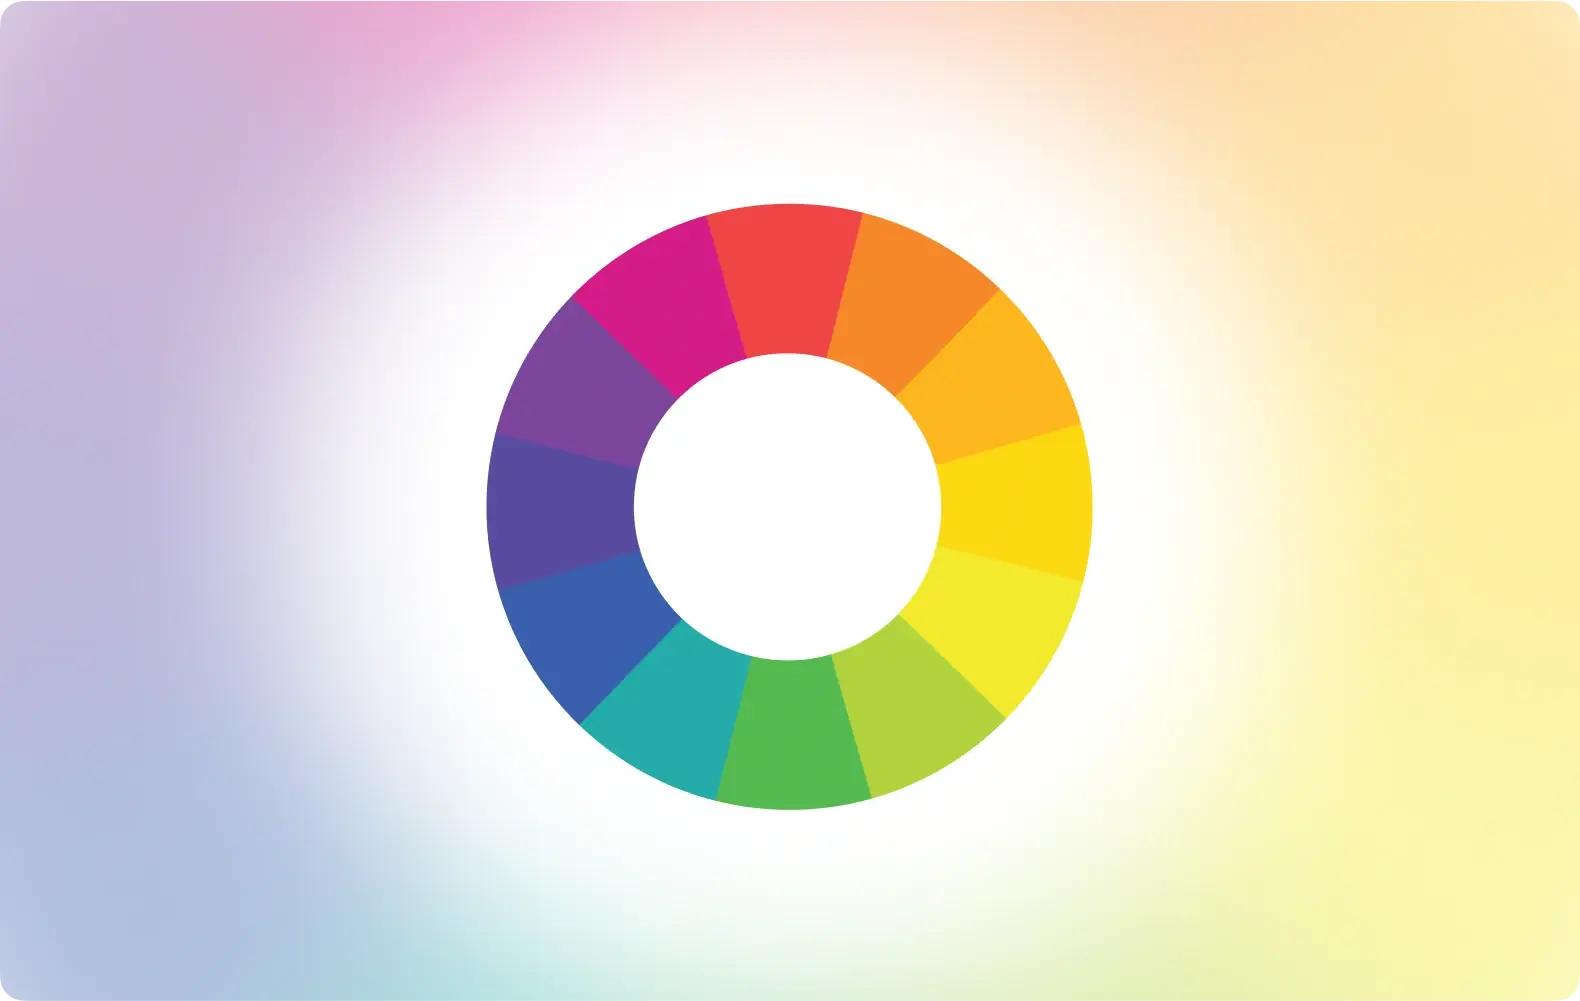 Image of a basic color wheel with 12 colors.